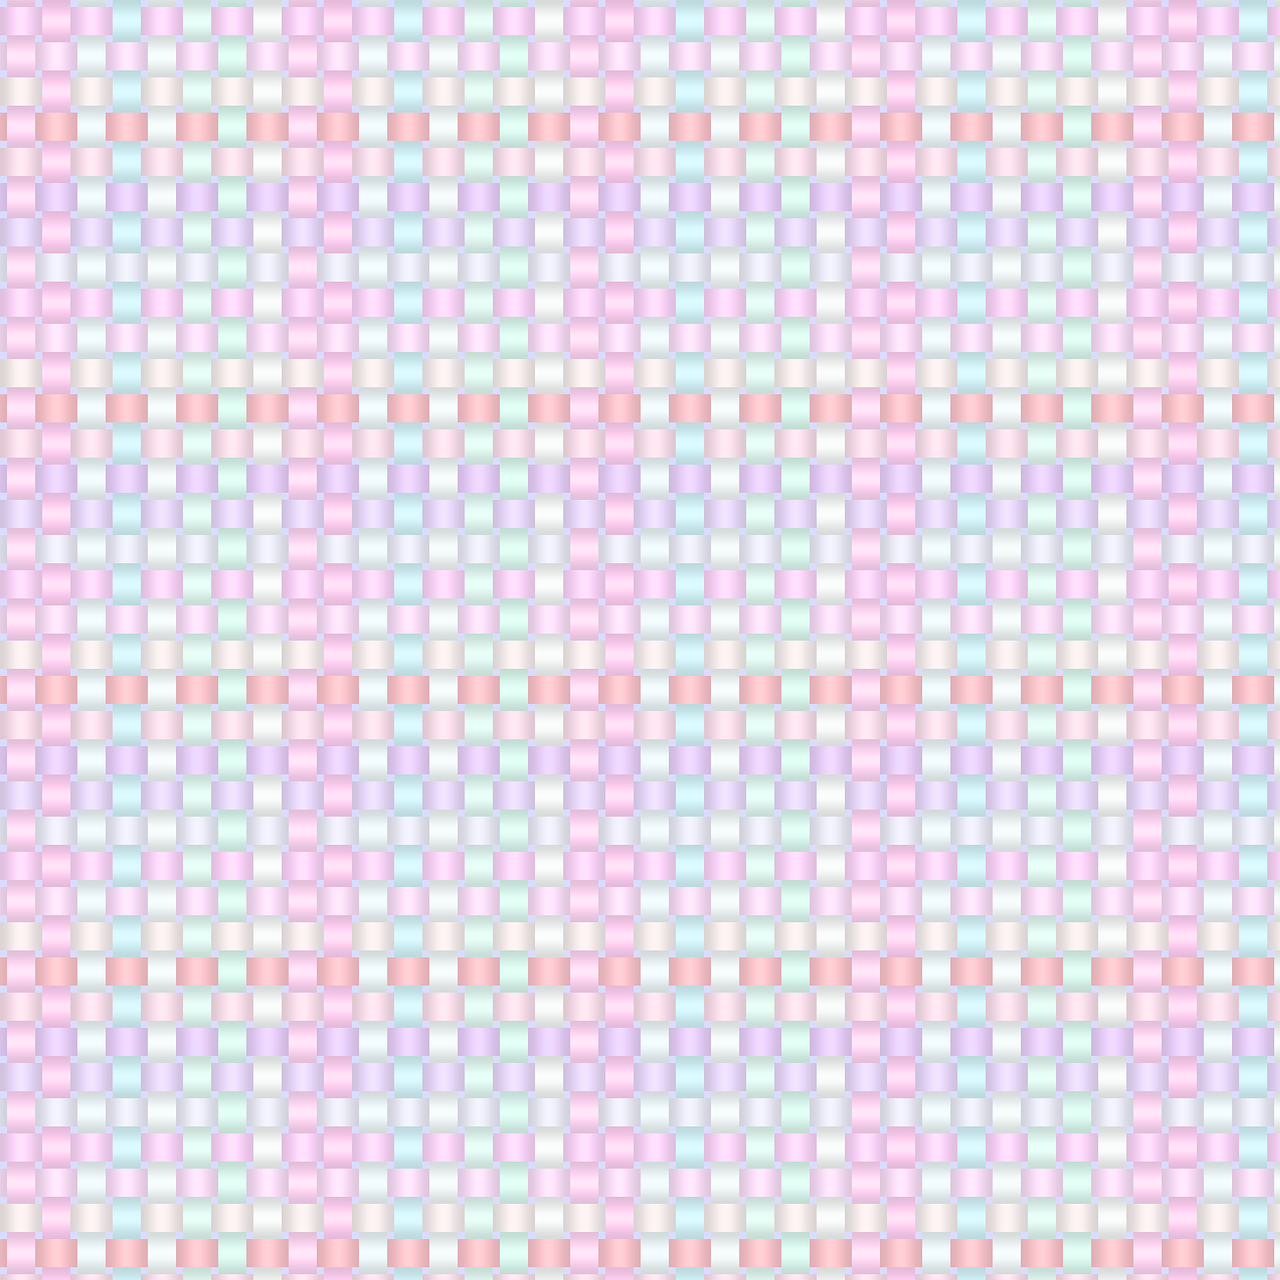 a pink and blue checkered pattern on a white background, a digital rendering, inspired by Pearl Frush, tumblr, pixel art, ethereal rainbow bubbles, muted pastel tones, grid, colorful dots